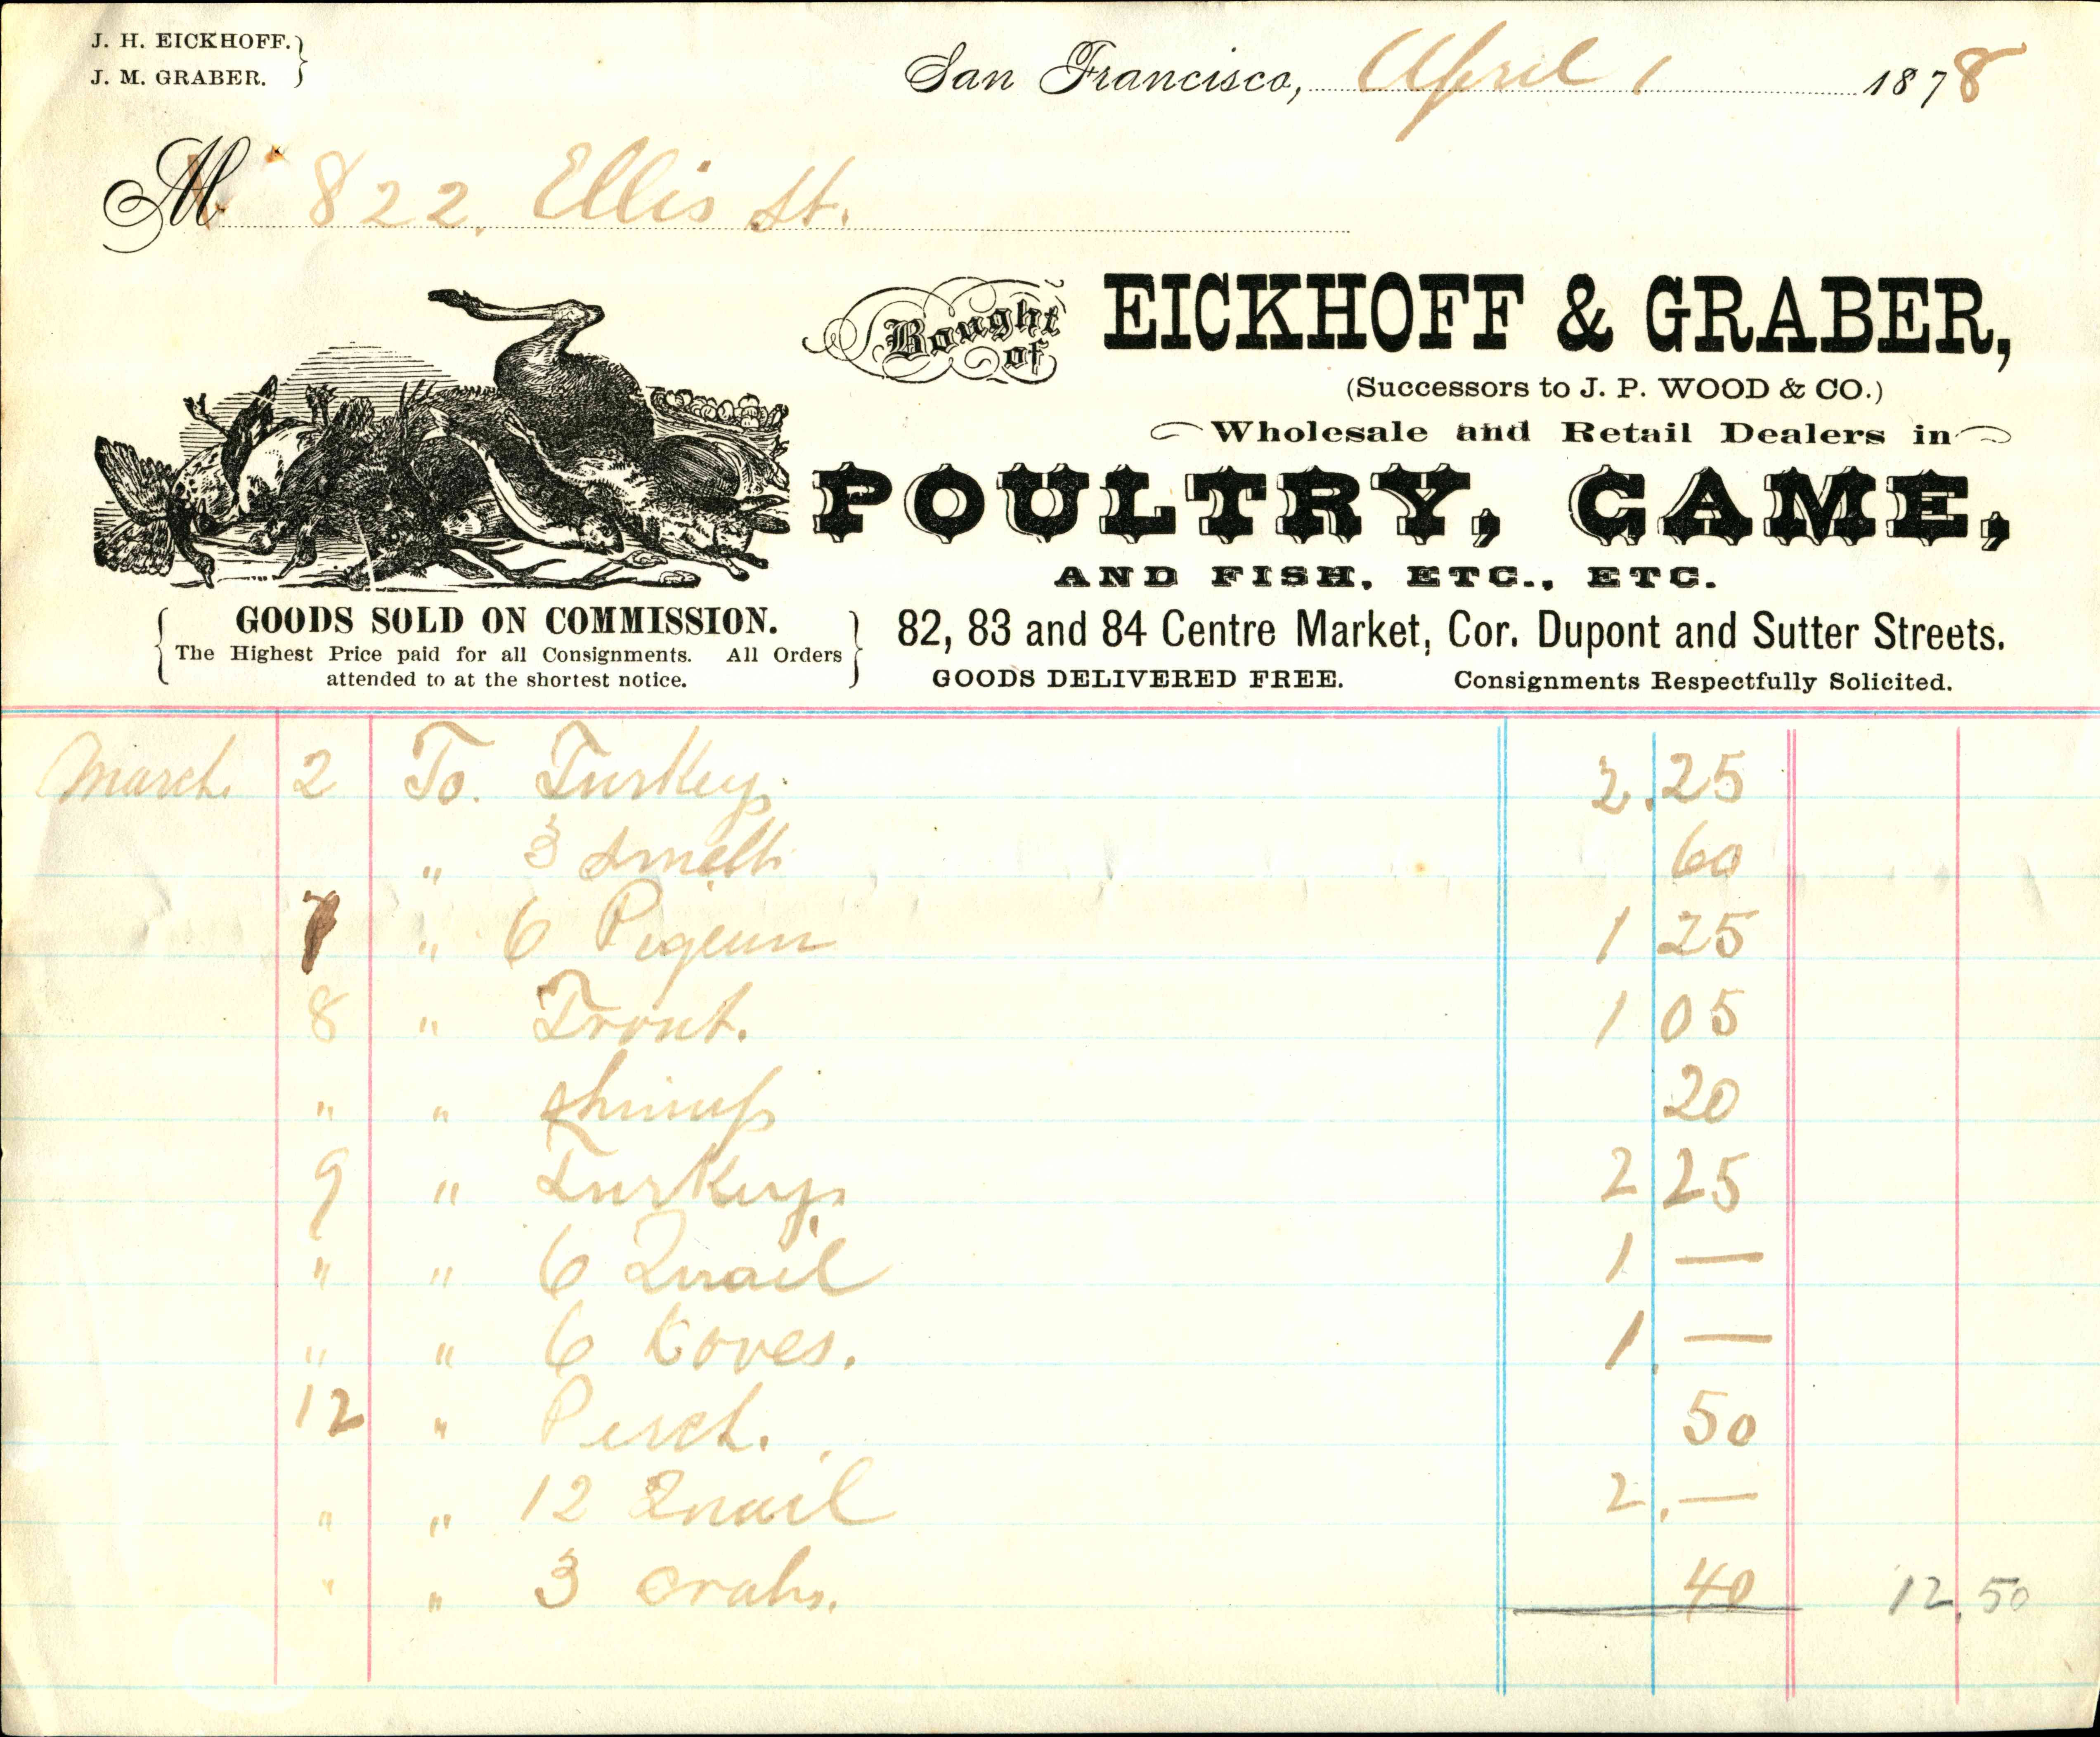 Poultry, game, and fish on receipt